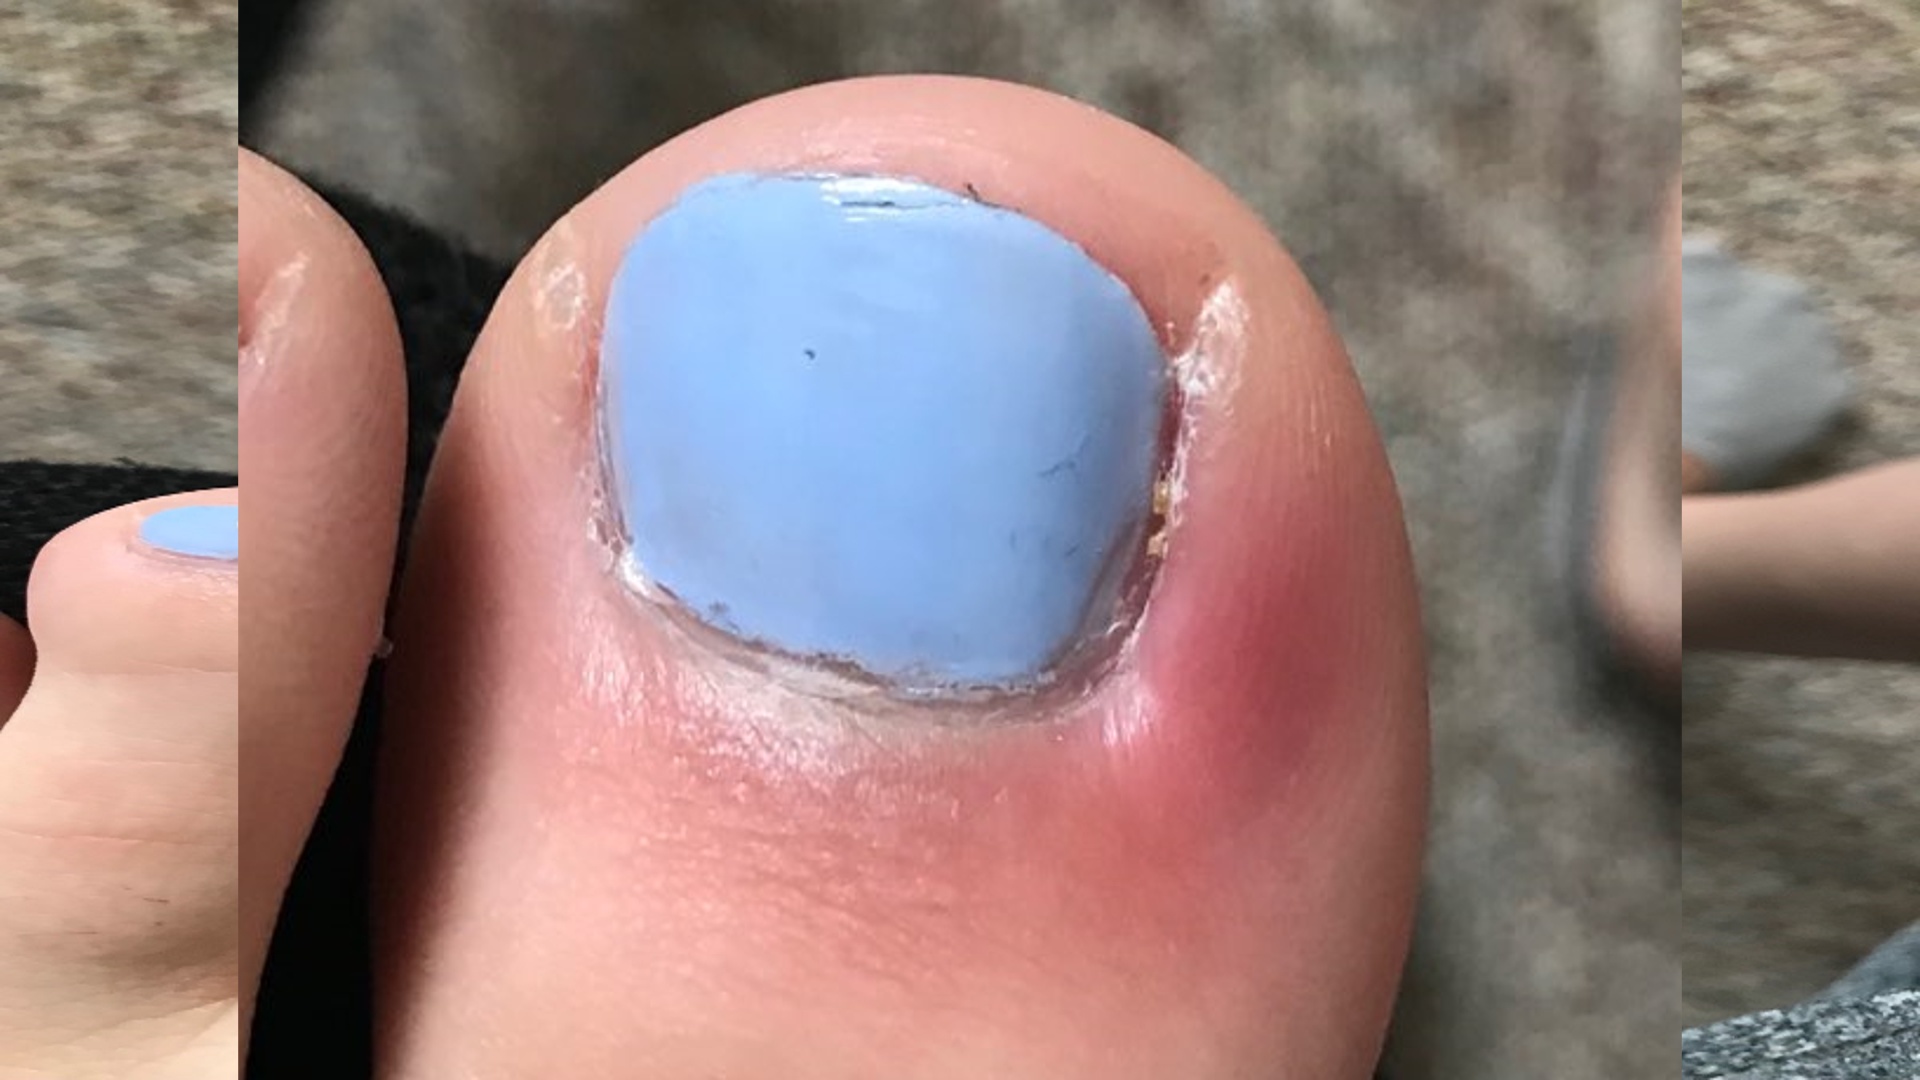 Two locals complain of toe infections following pedicures